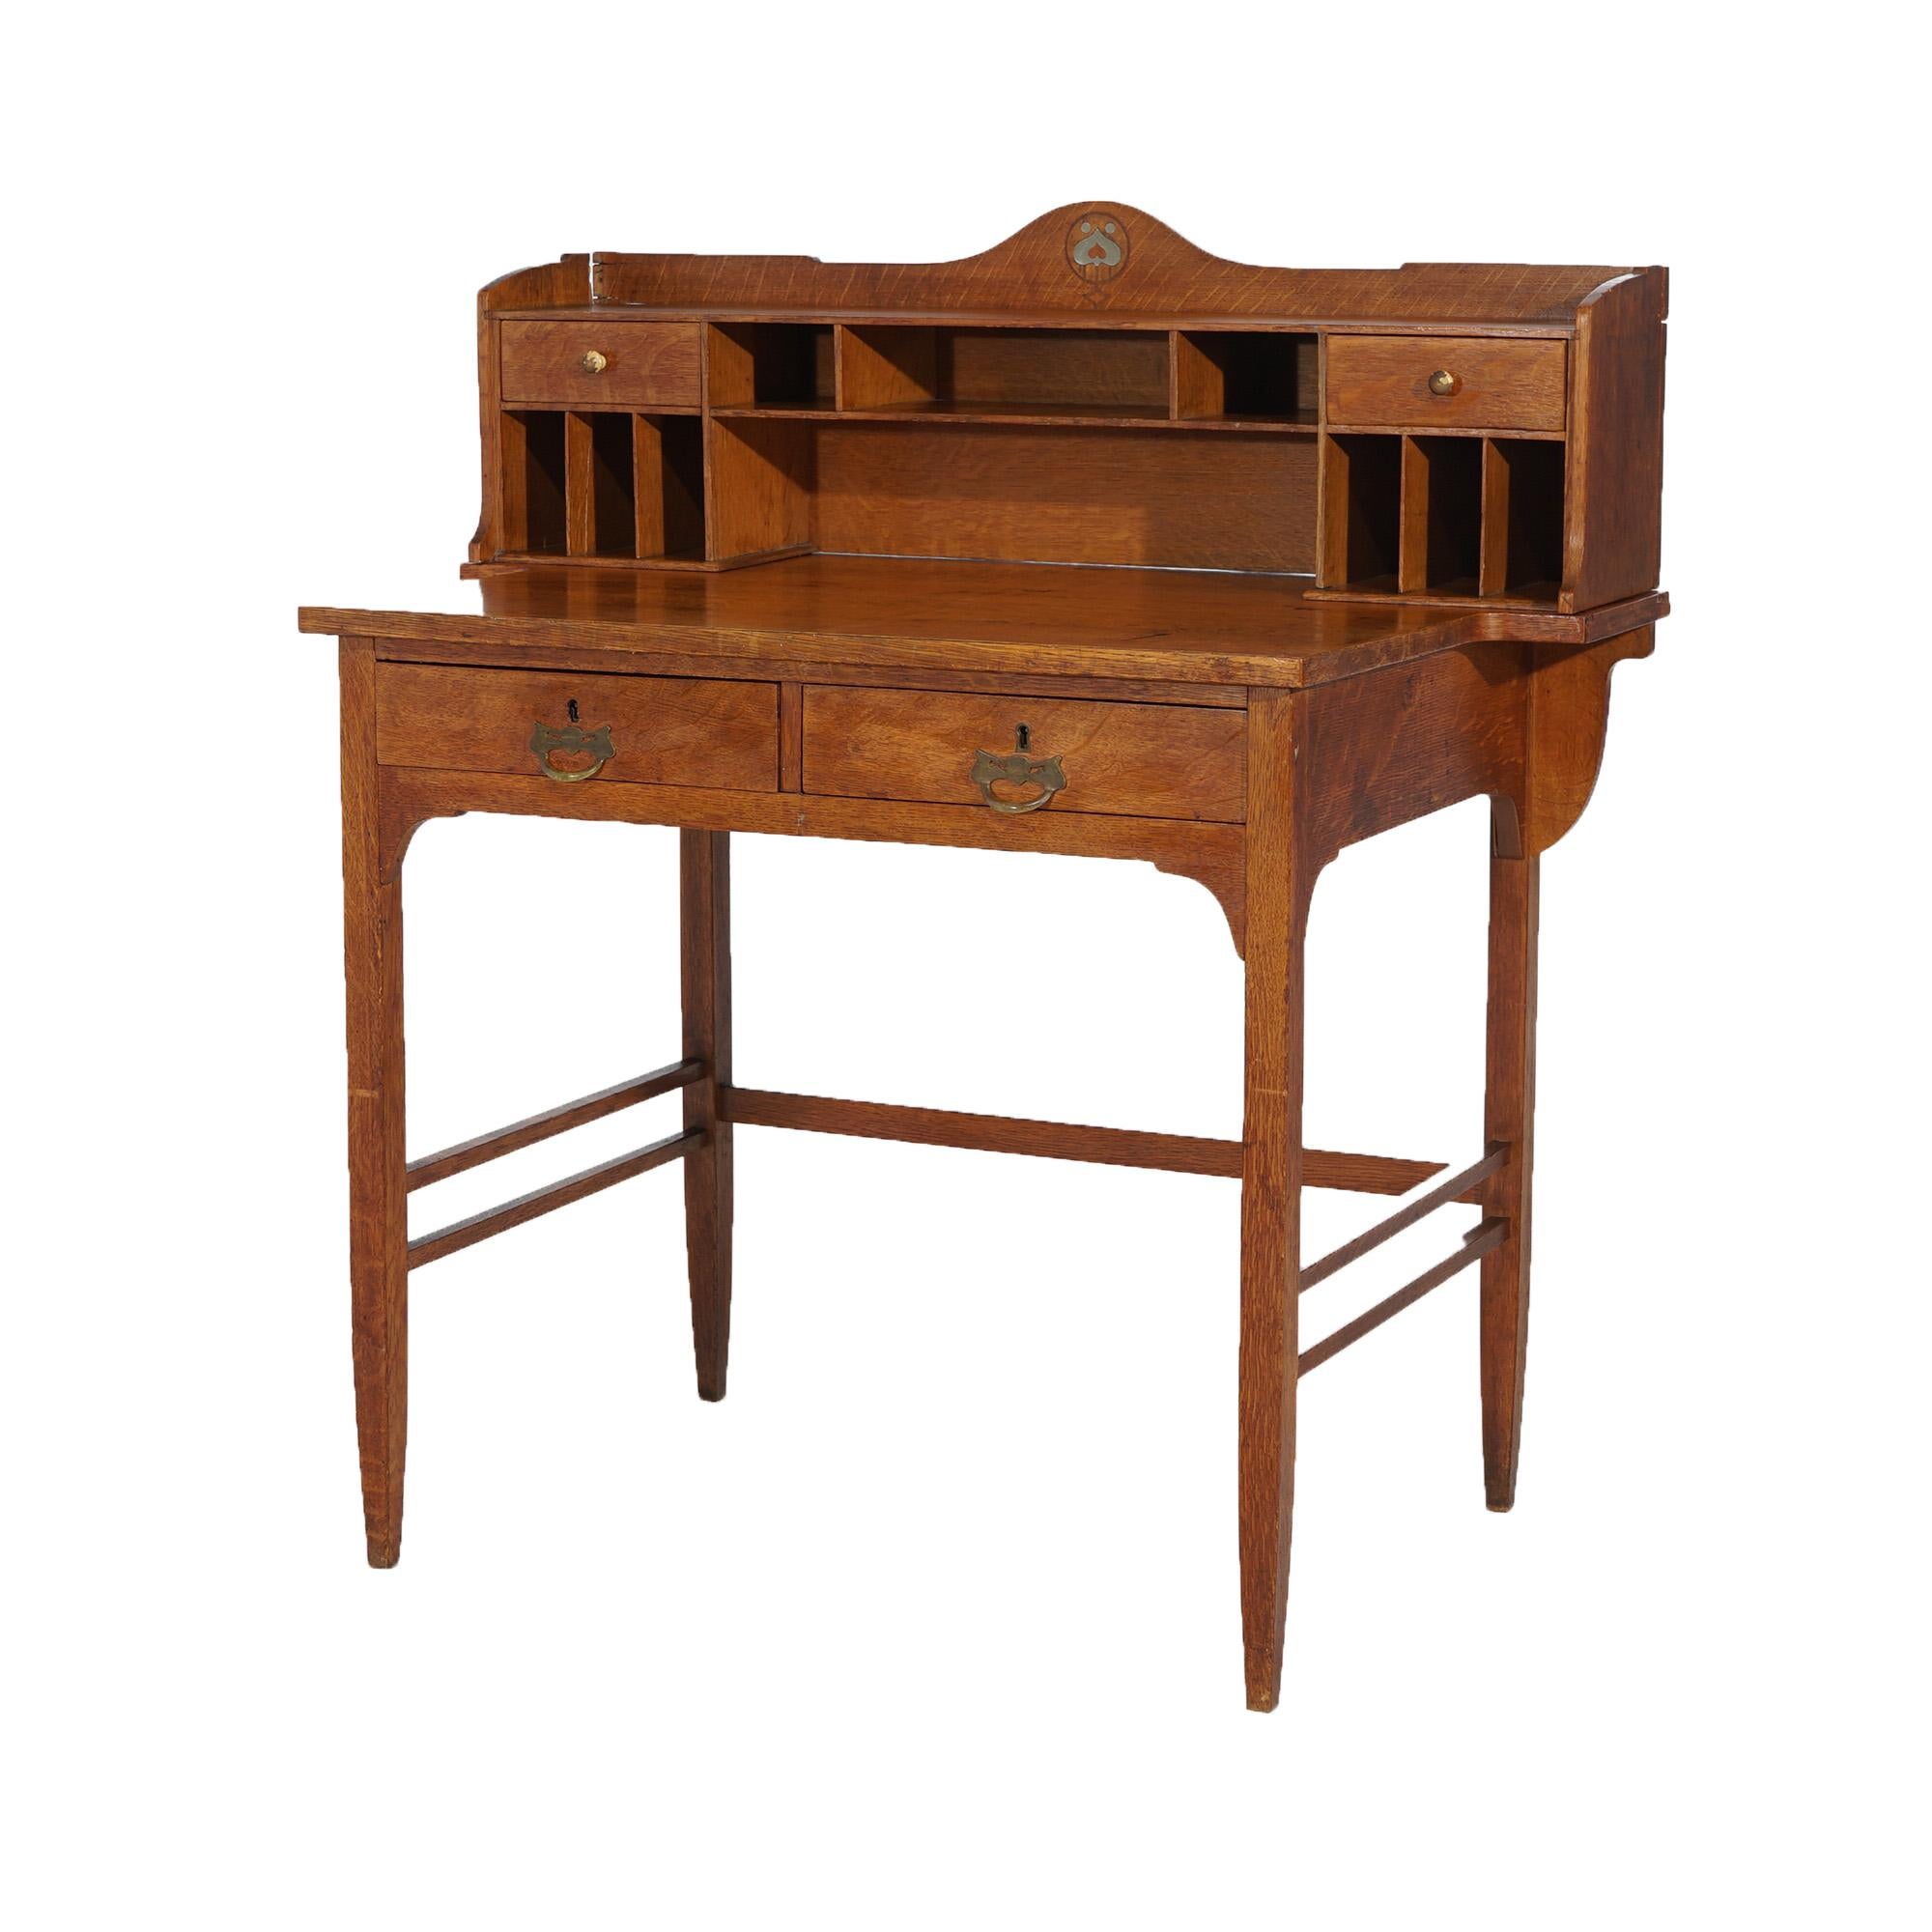 An antique English Arts & Crafts post card desk in the manner of Liberty & Co. offers oak construction with upper having shaped backsplash, pigeon holes and drawers over double drawer case raised on straight and square legs, maker label as